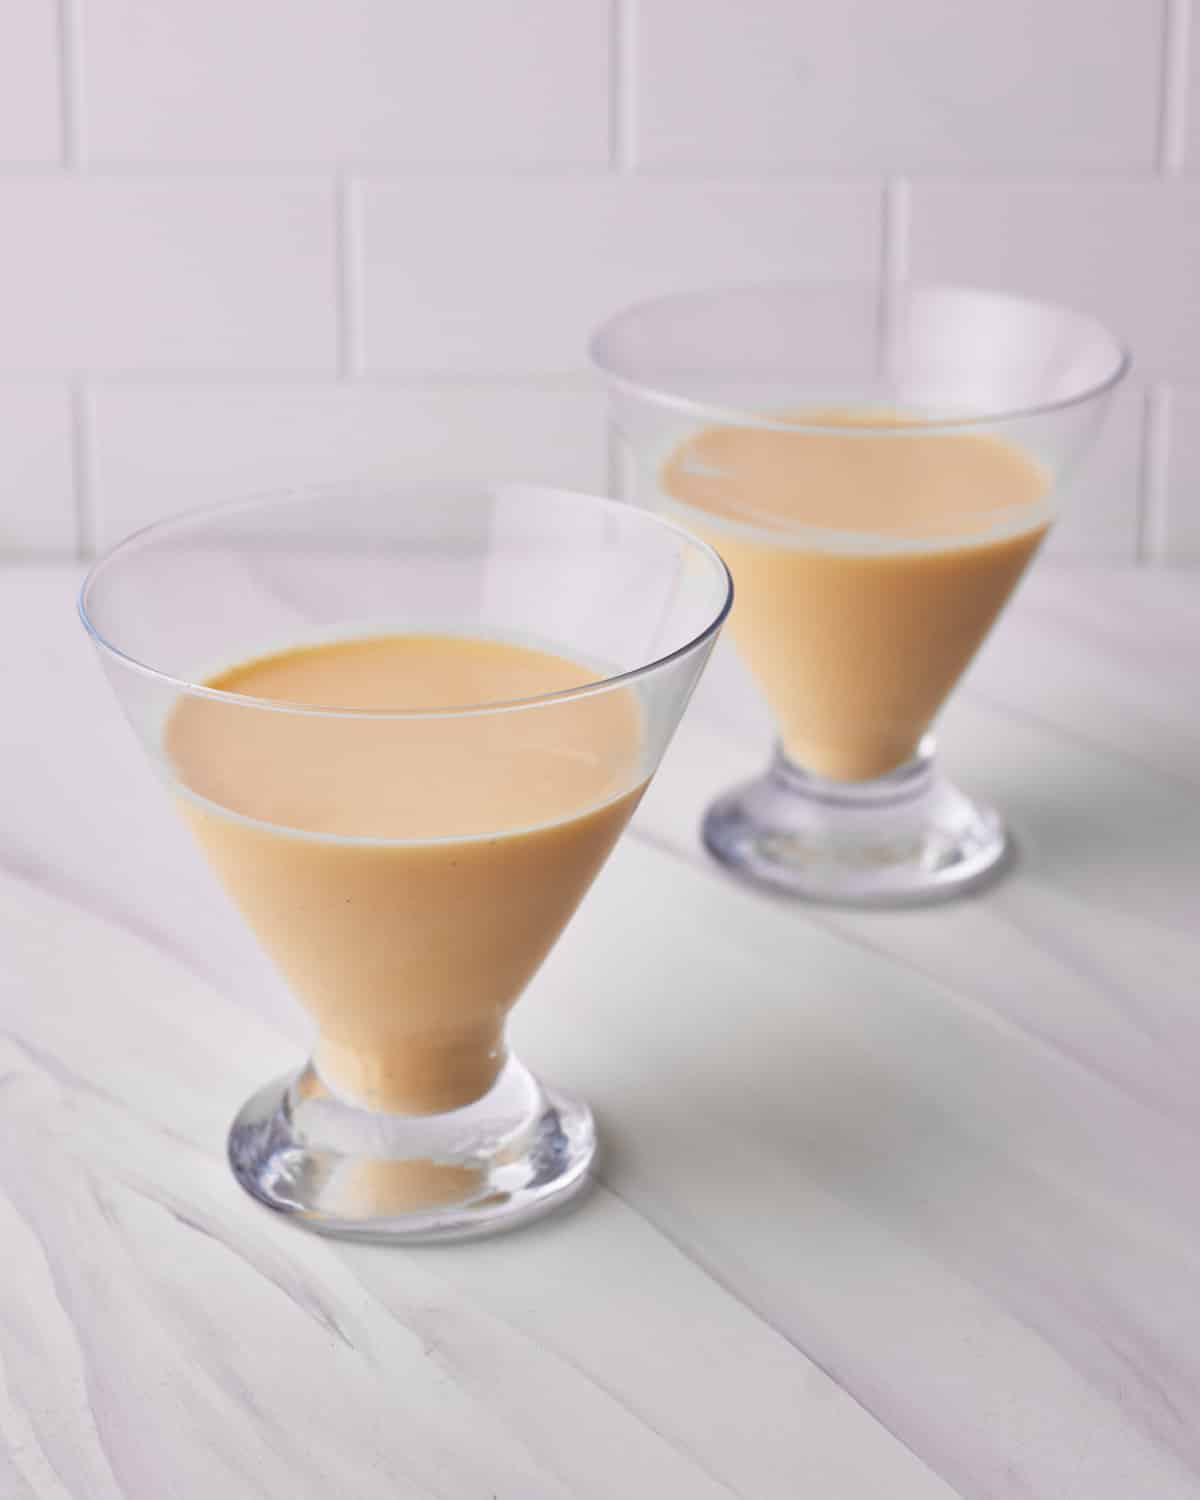 creme anglaise in a glass dish for floating island desserts.